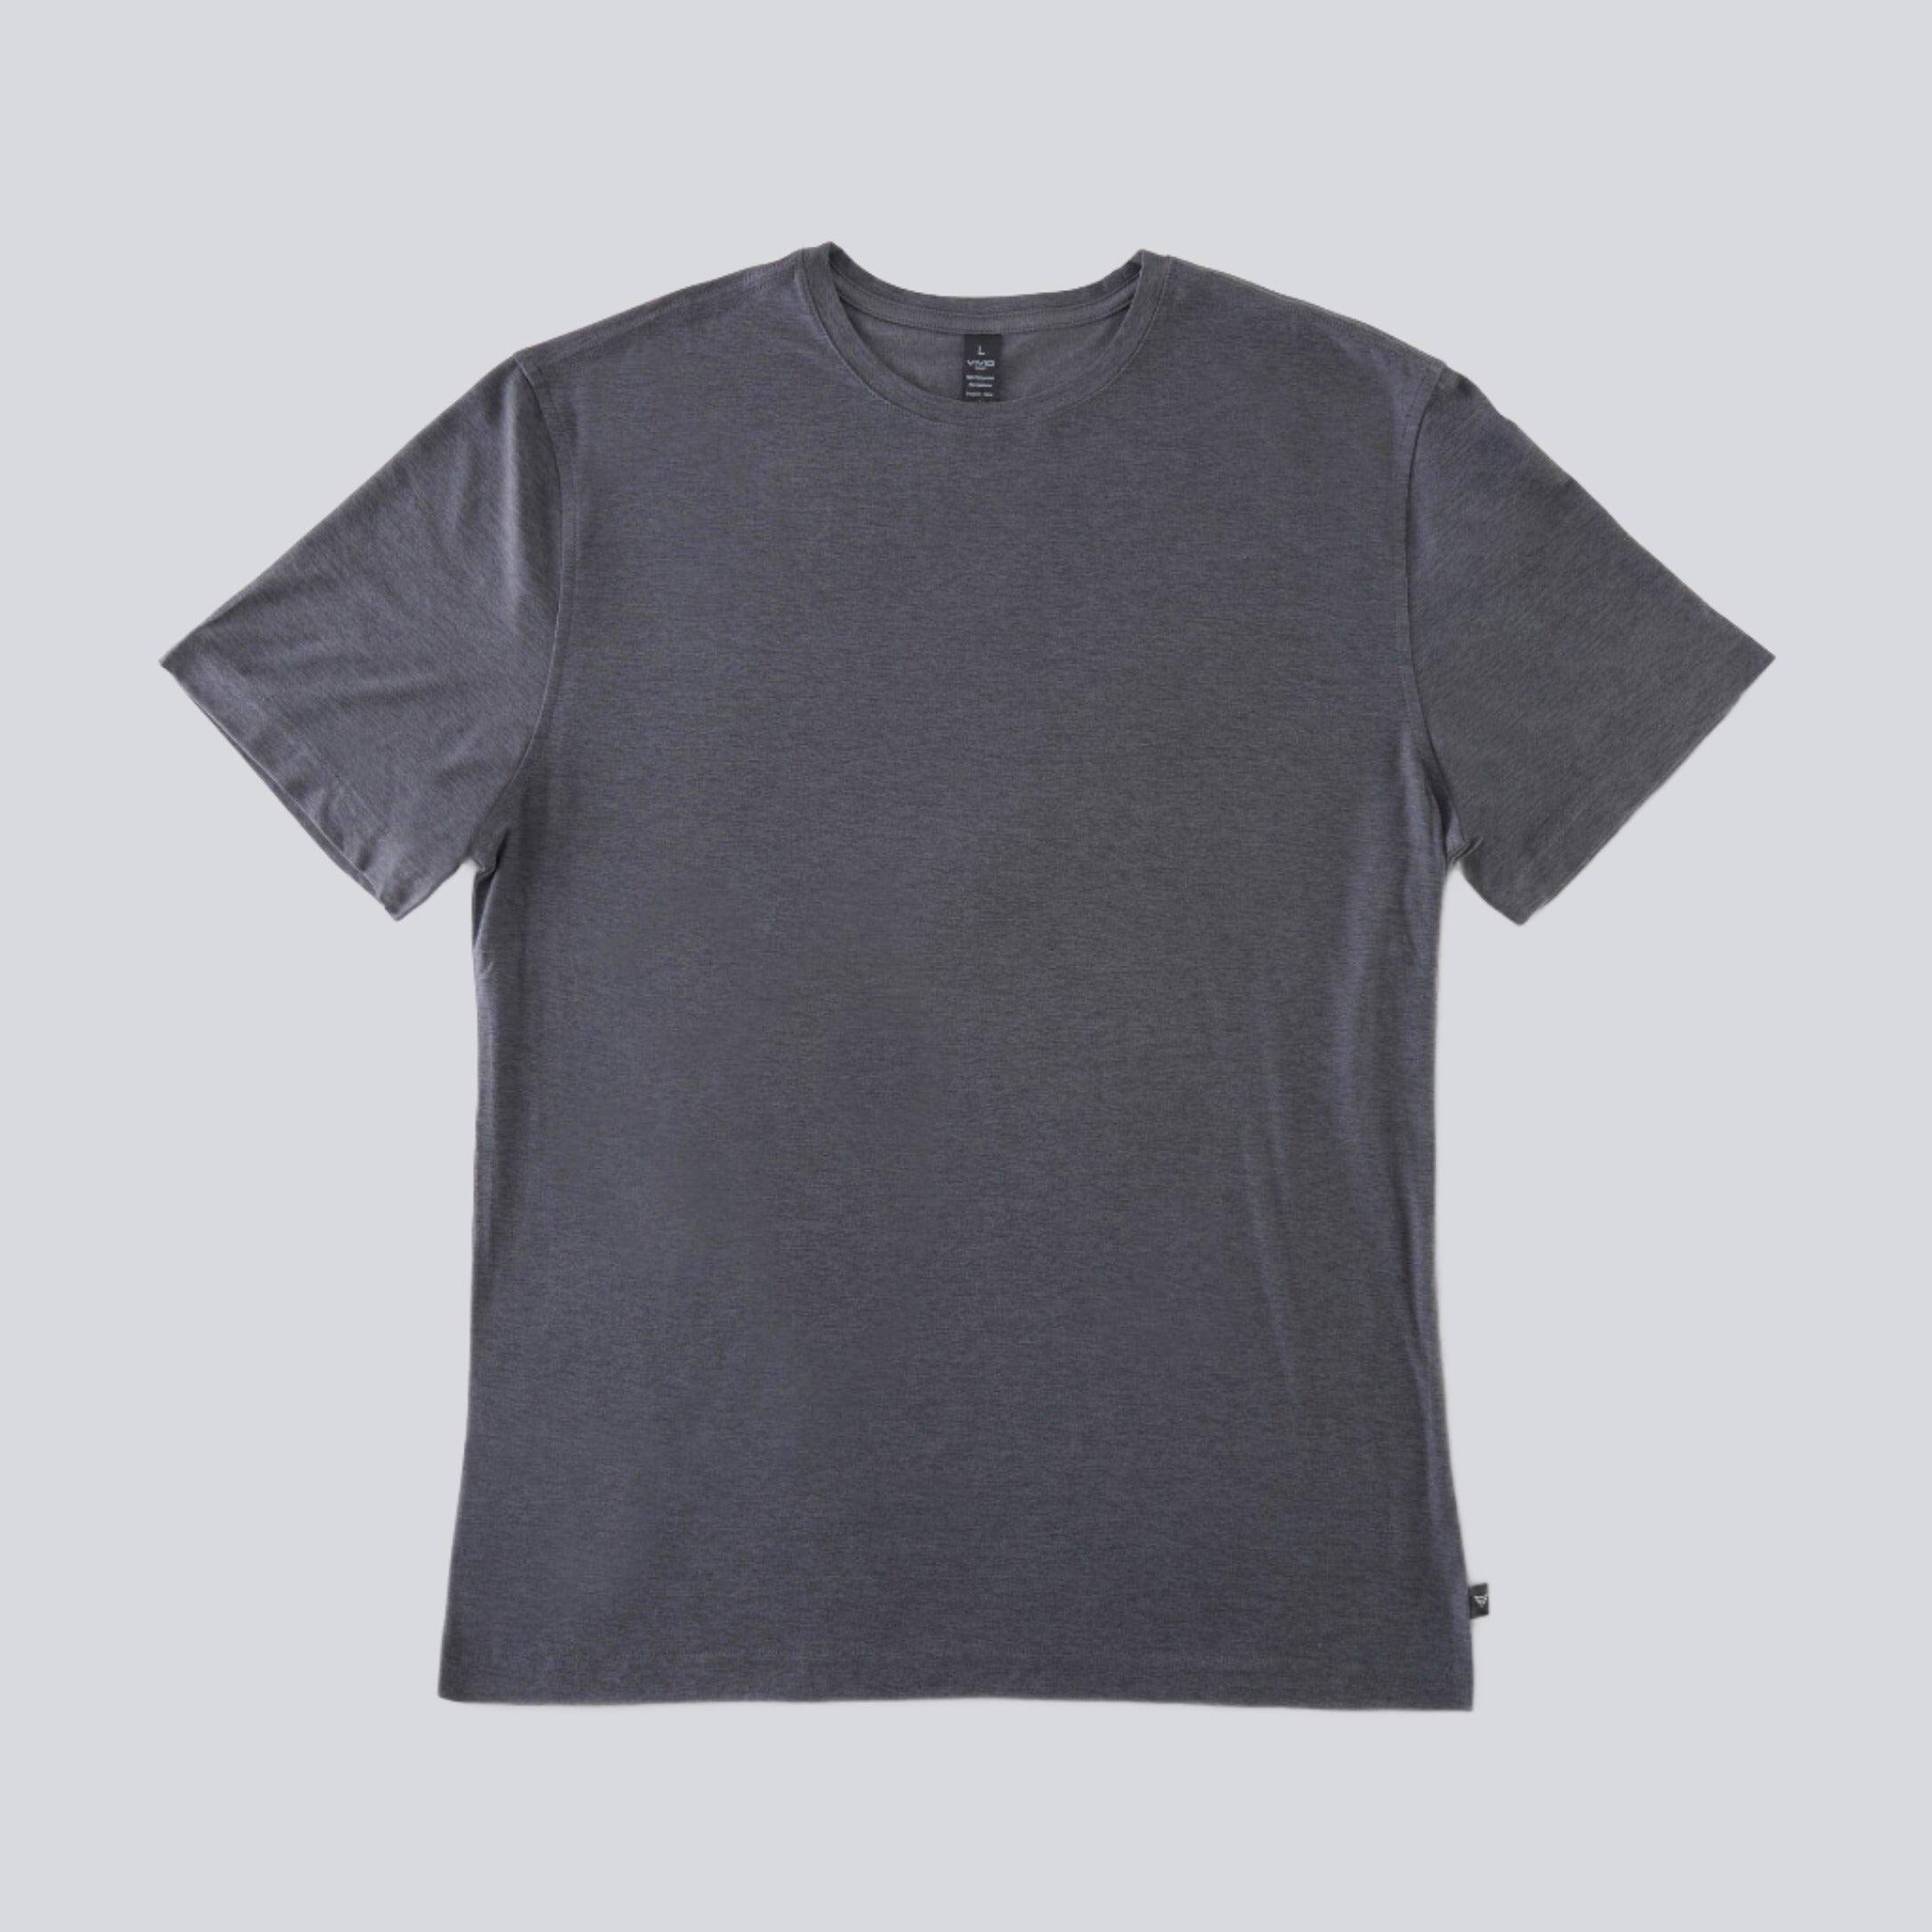 Supersoft Tee